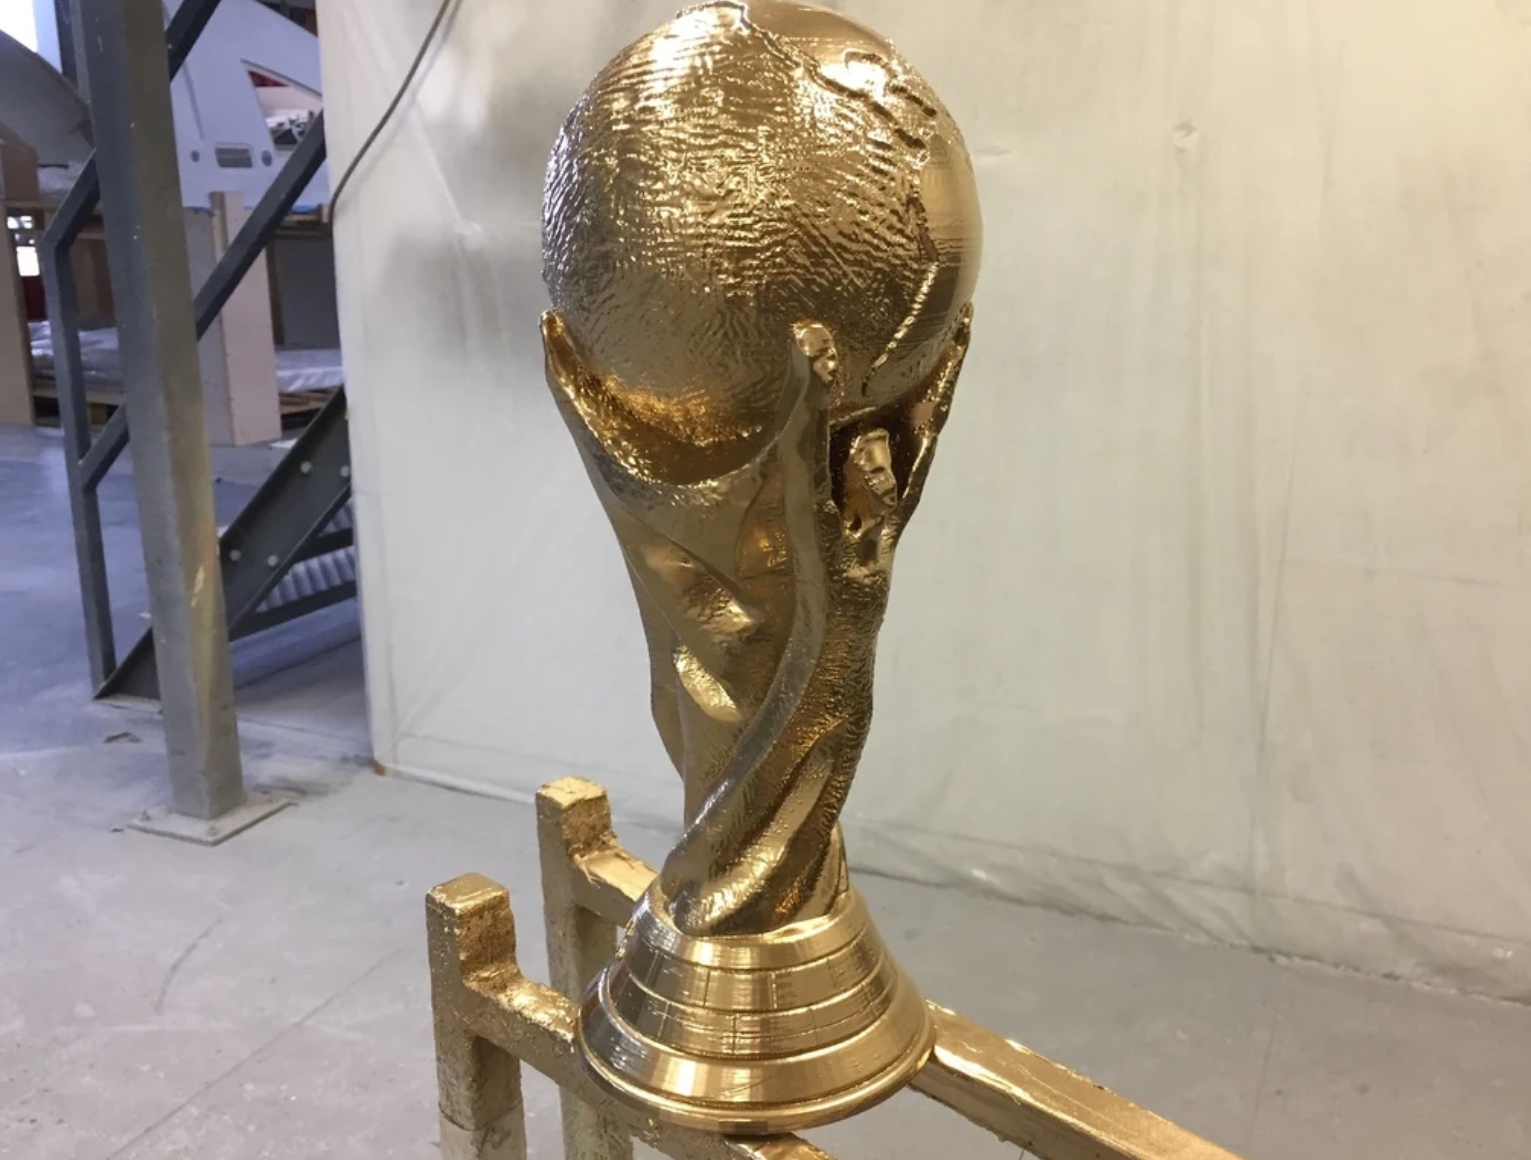 3D Printed Solid FIFA World Cup Trophy